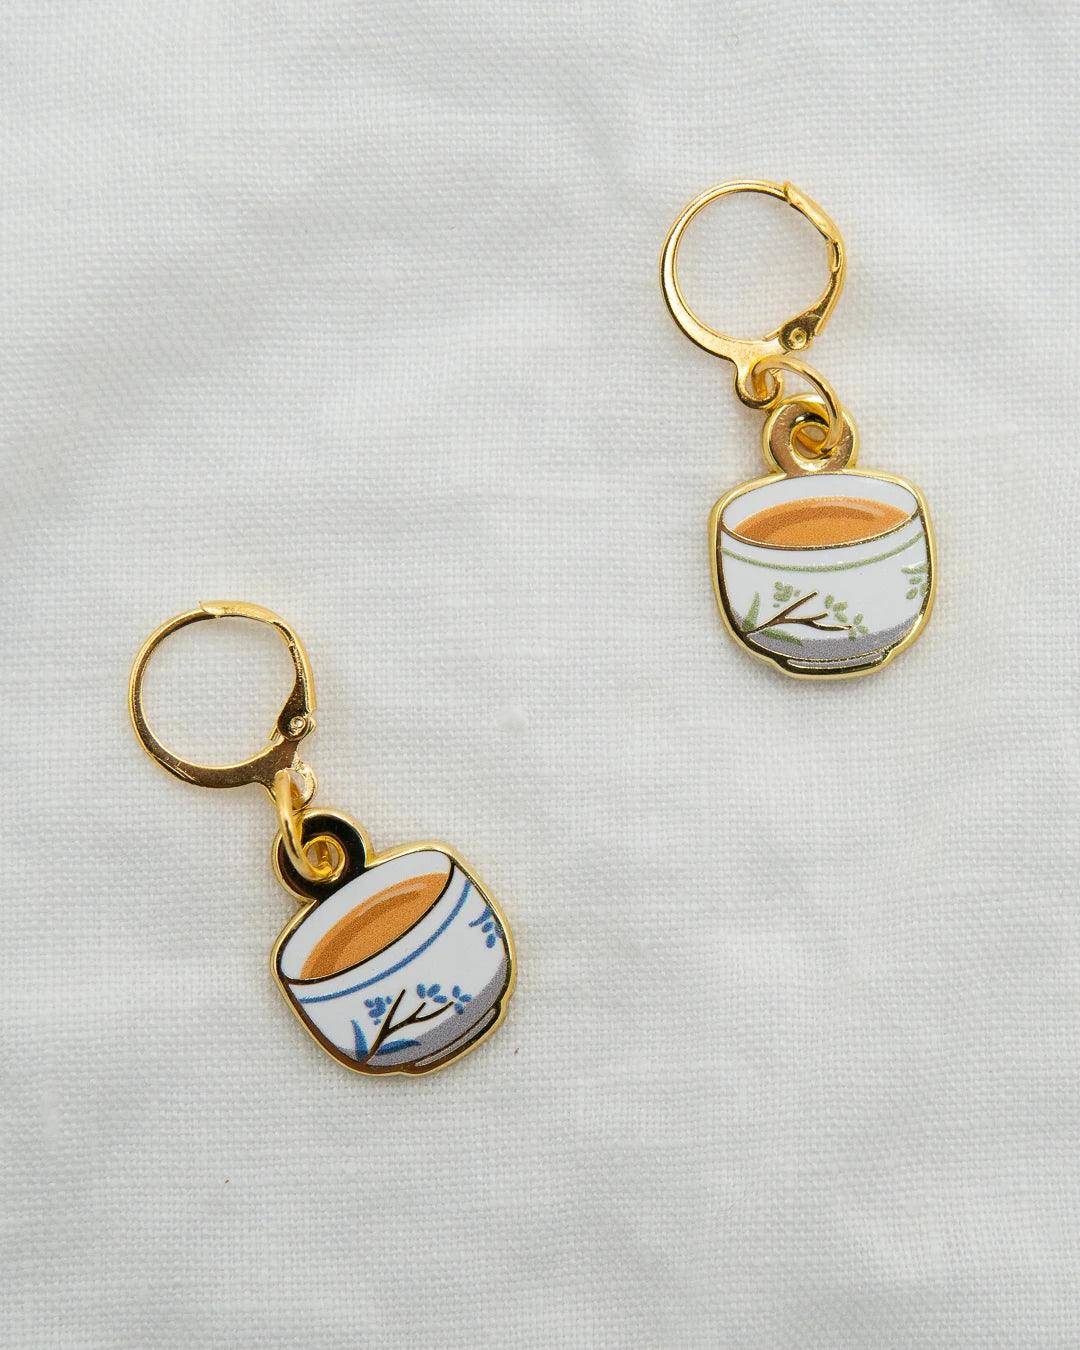 Tea Service Stitch Marker Complete Set - Aimee Sher Makes